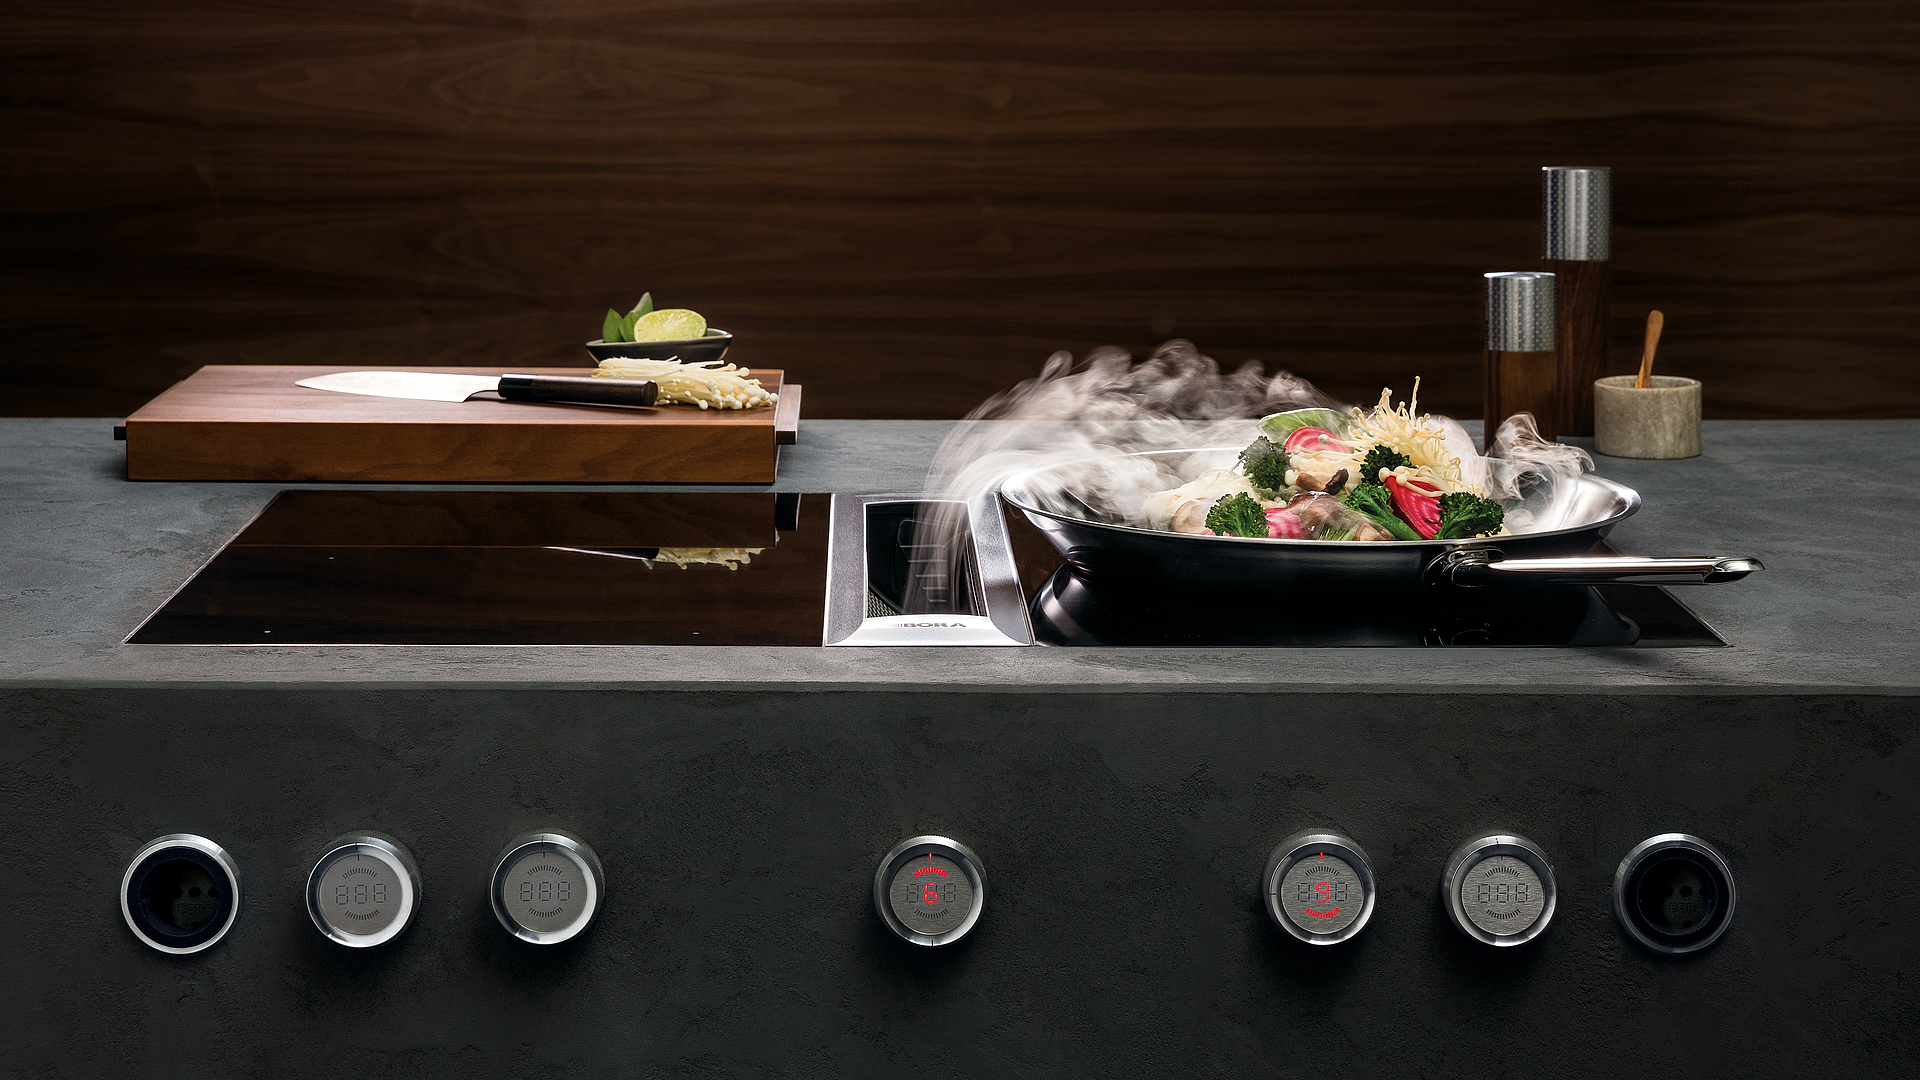 BORA induction glass ceramic wok cooktop: a perfect taste of the Far East